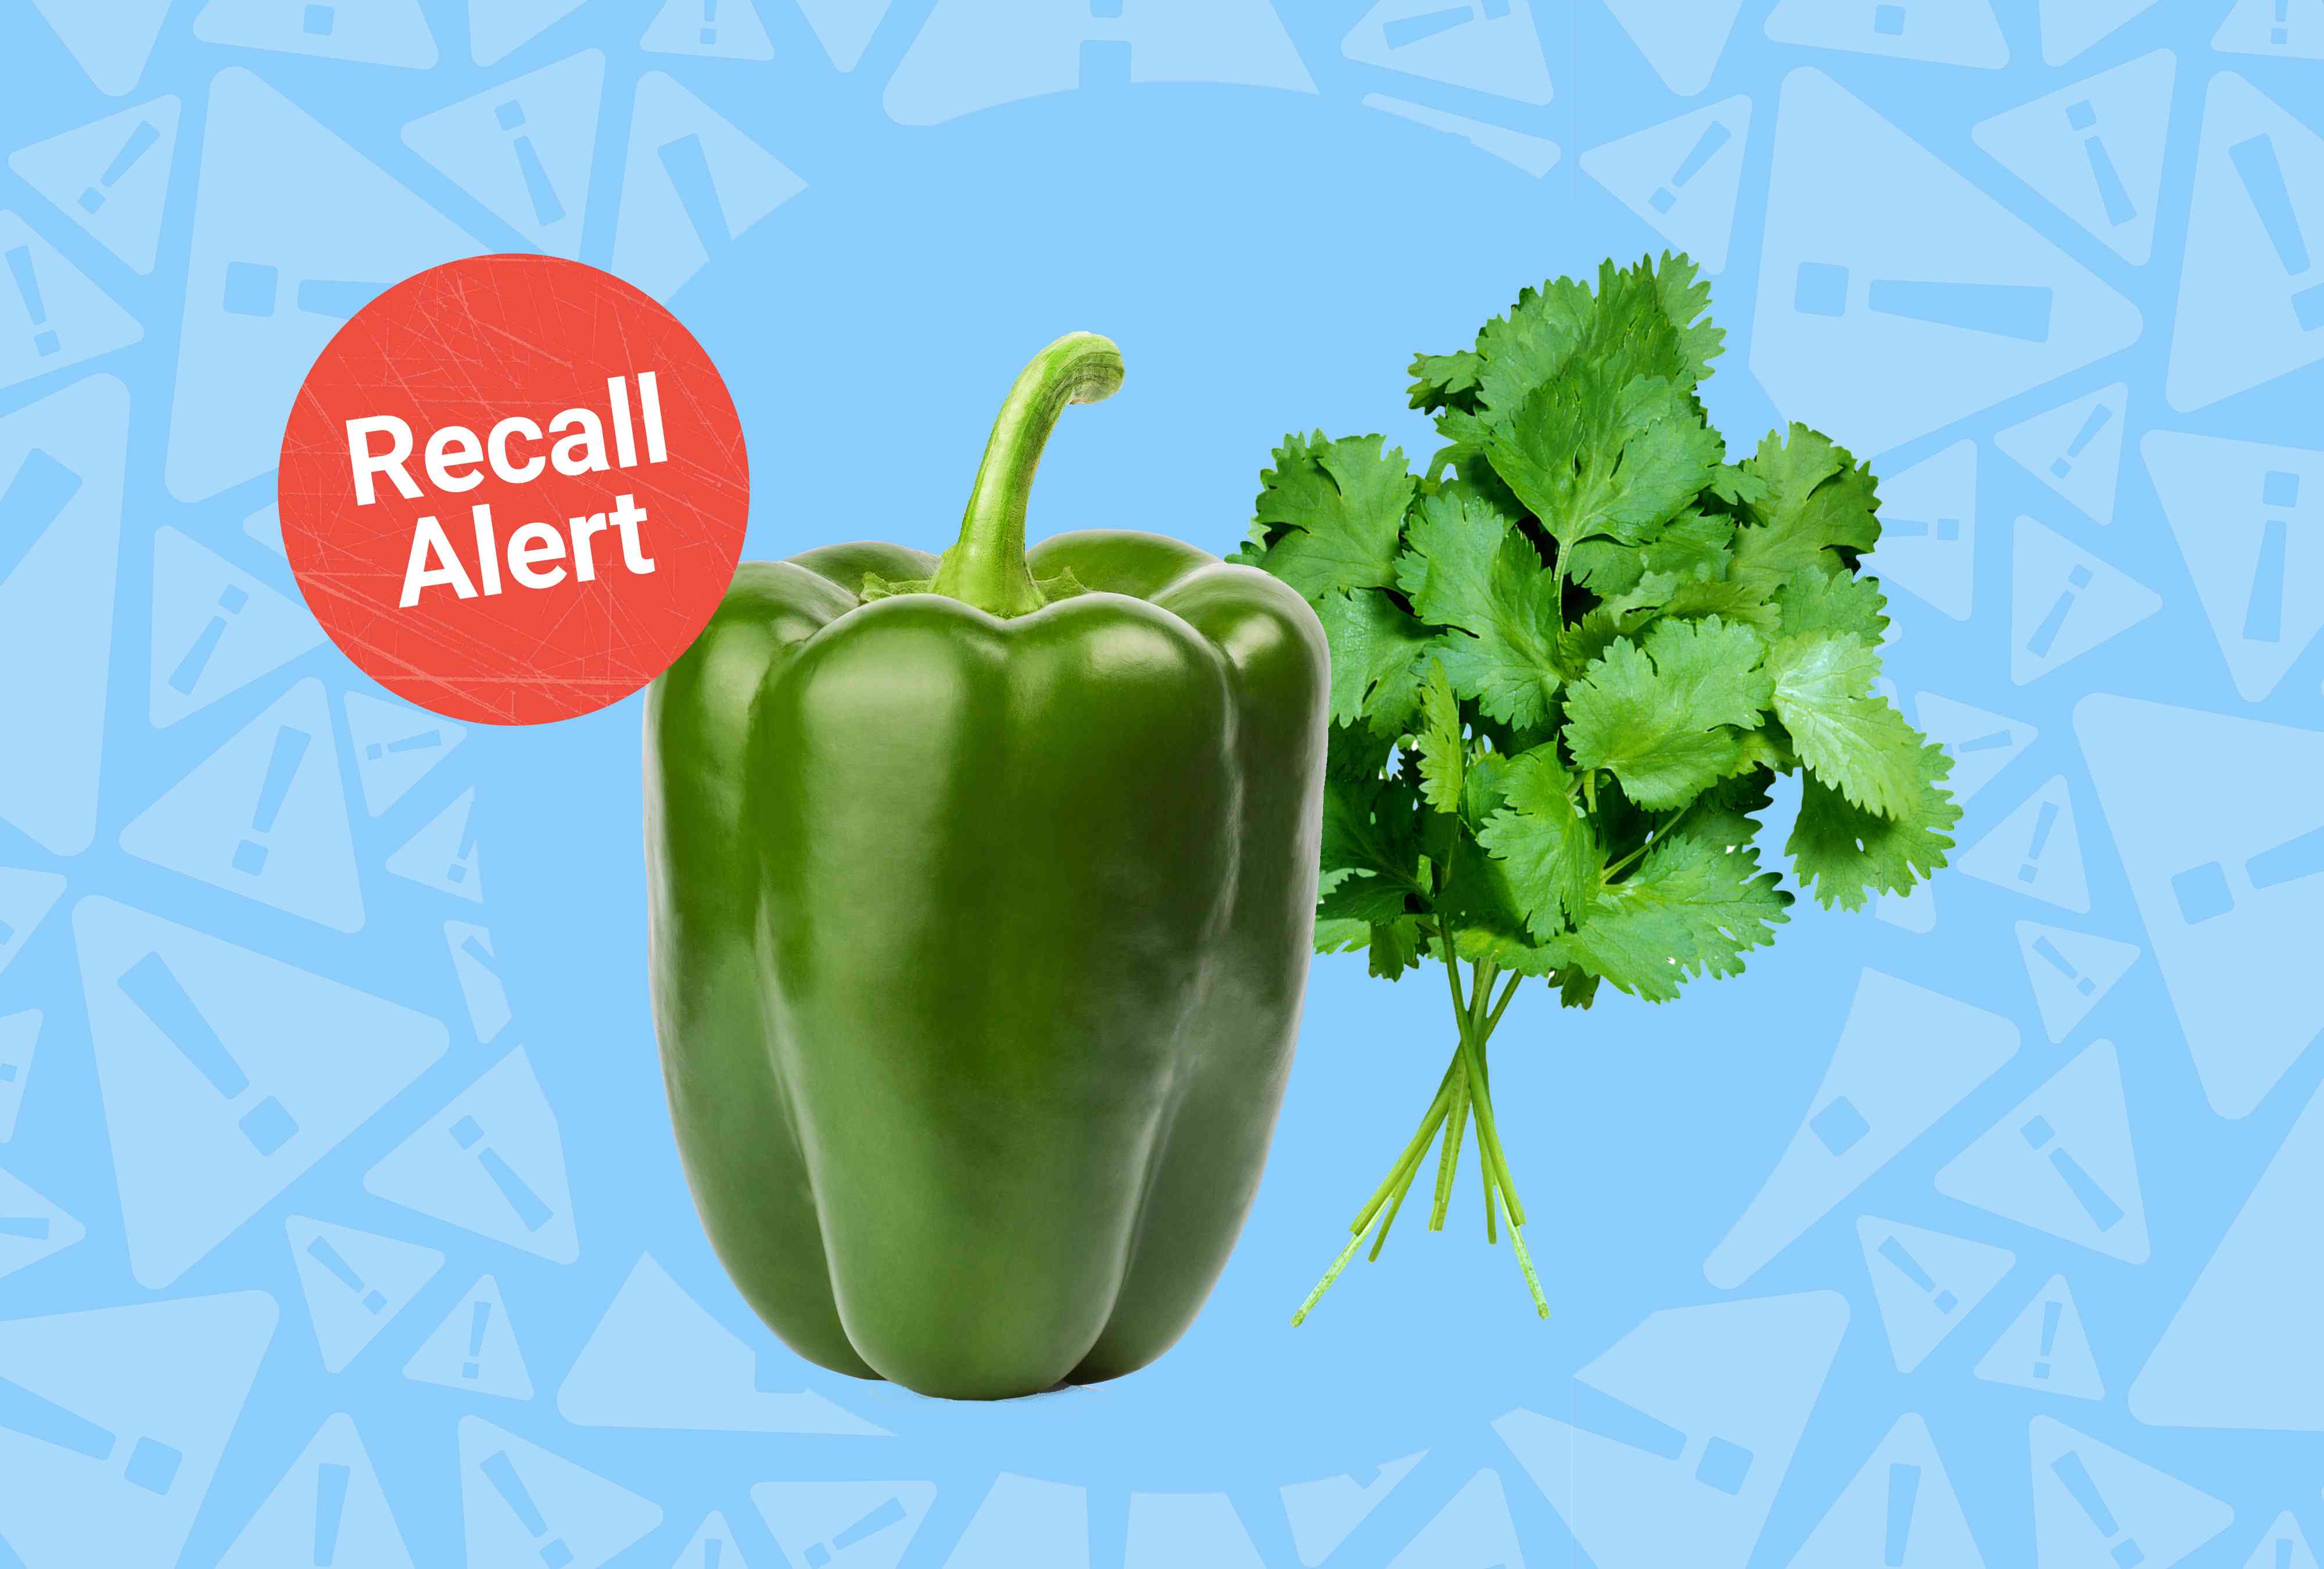 Over 15 Types of Vegetables from Aldi and Walmart Recalled Due to Listeria Contamination